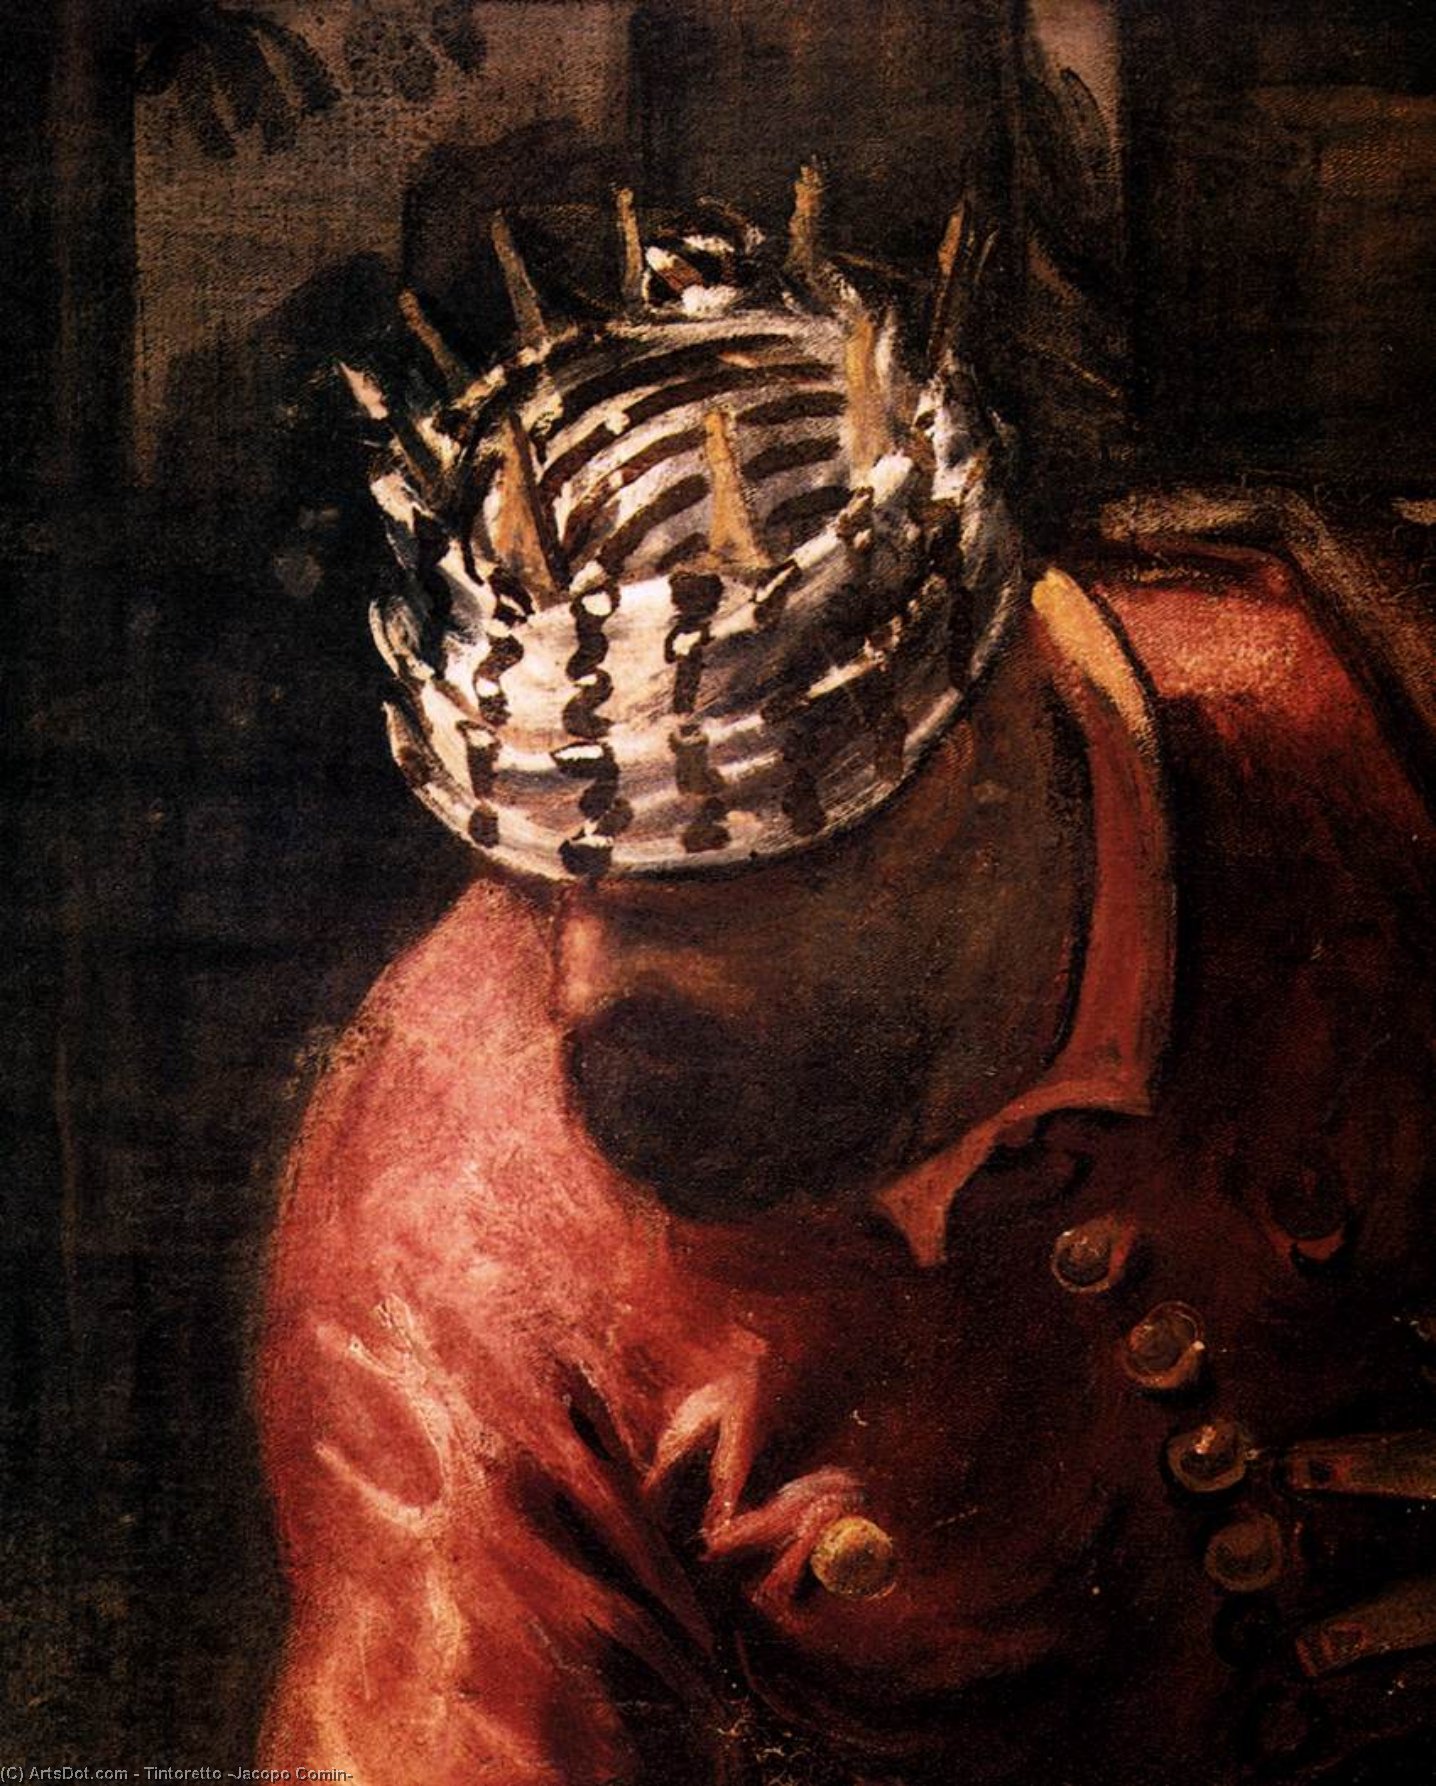 WikiOO.org - 백과 사전 - 회화, 삽화 Tintoretto (Jacopo Comin) - The Adoration of the Magi (detail)